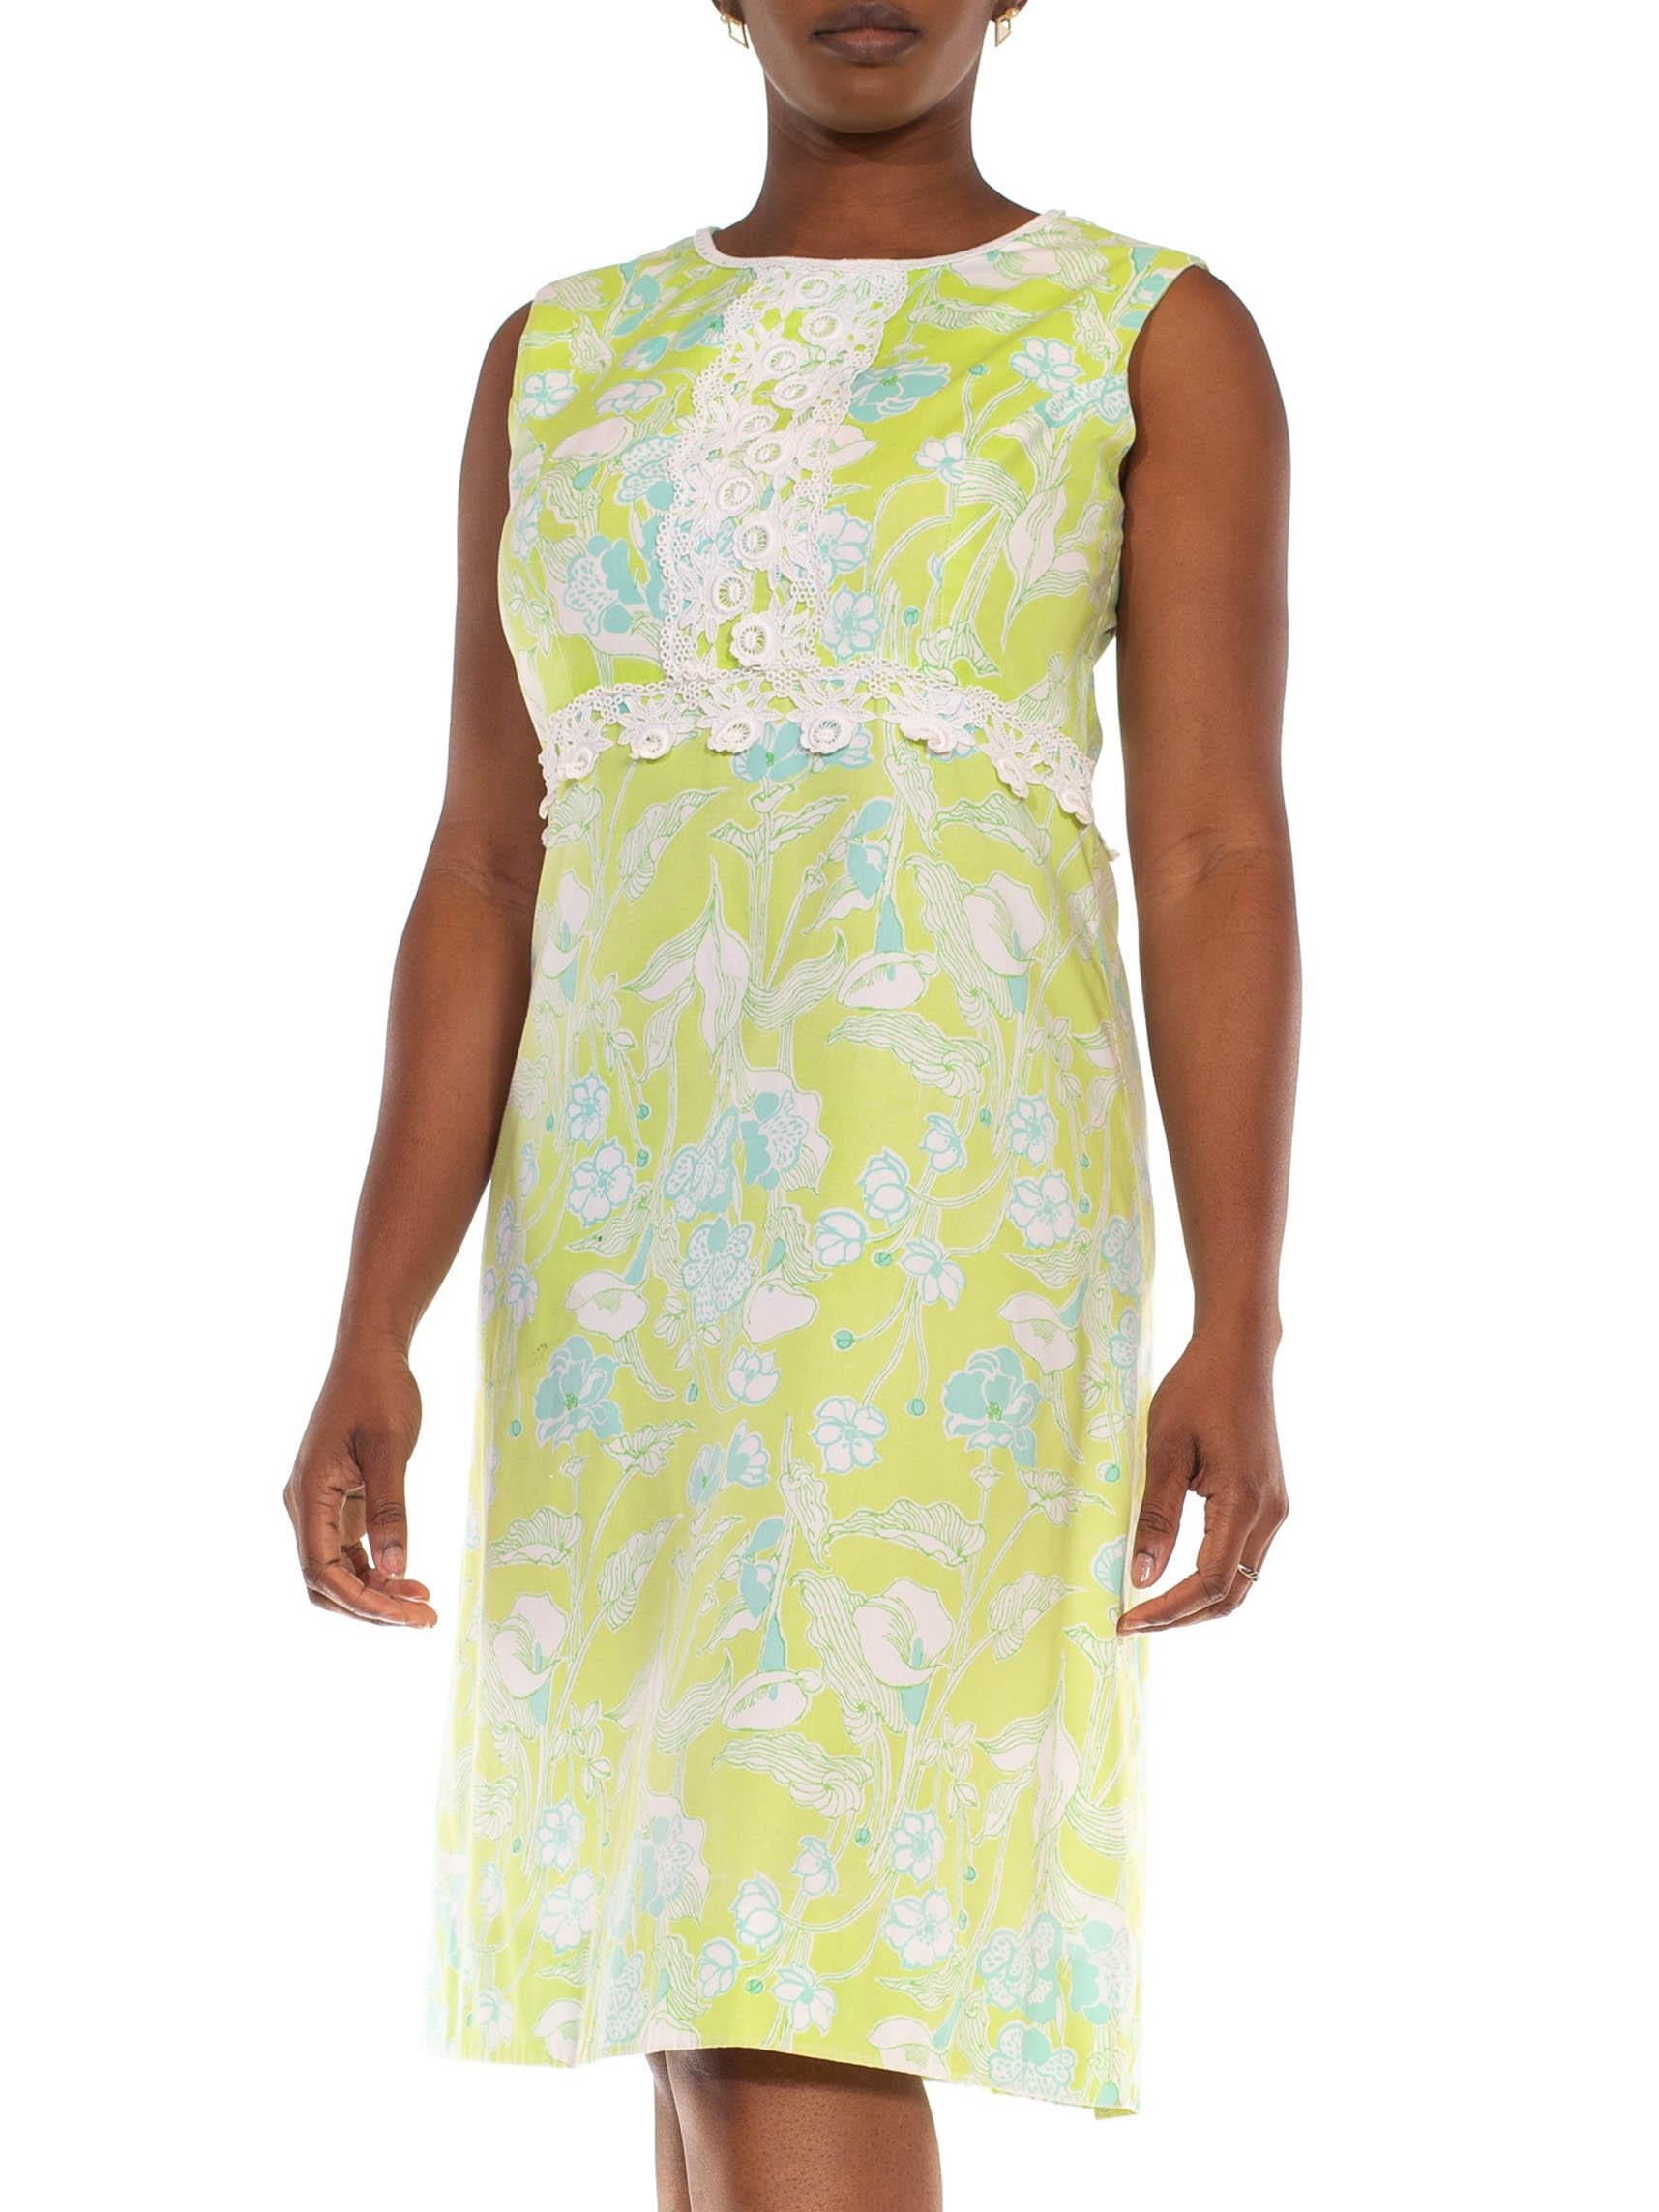 1960S LILLY PULITZER Light Green & Blue Cotton Sleeveless Floral Dress With Lace For Sale 2